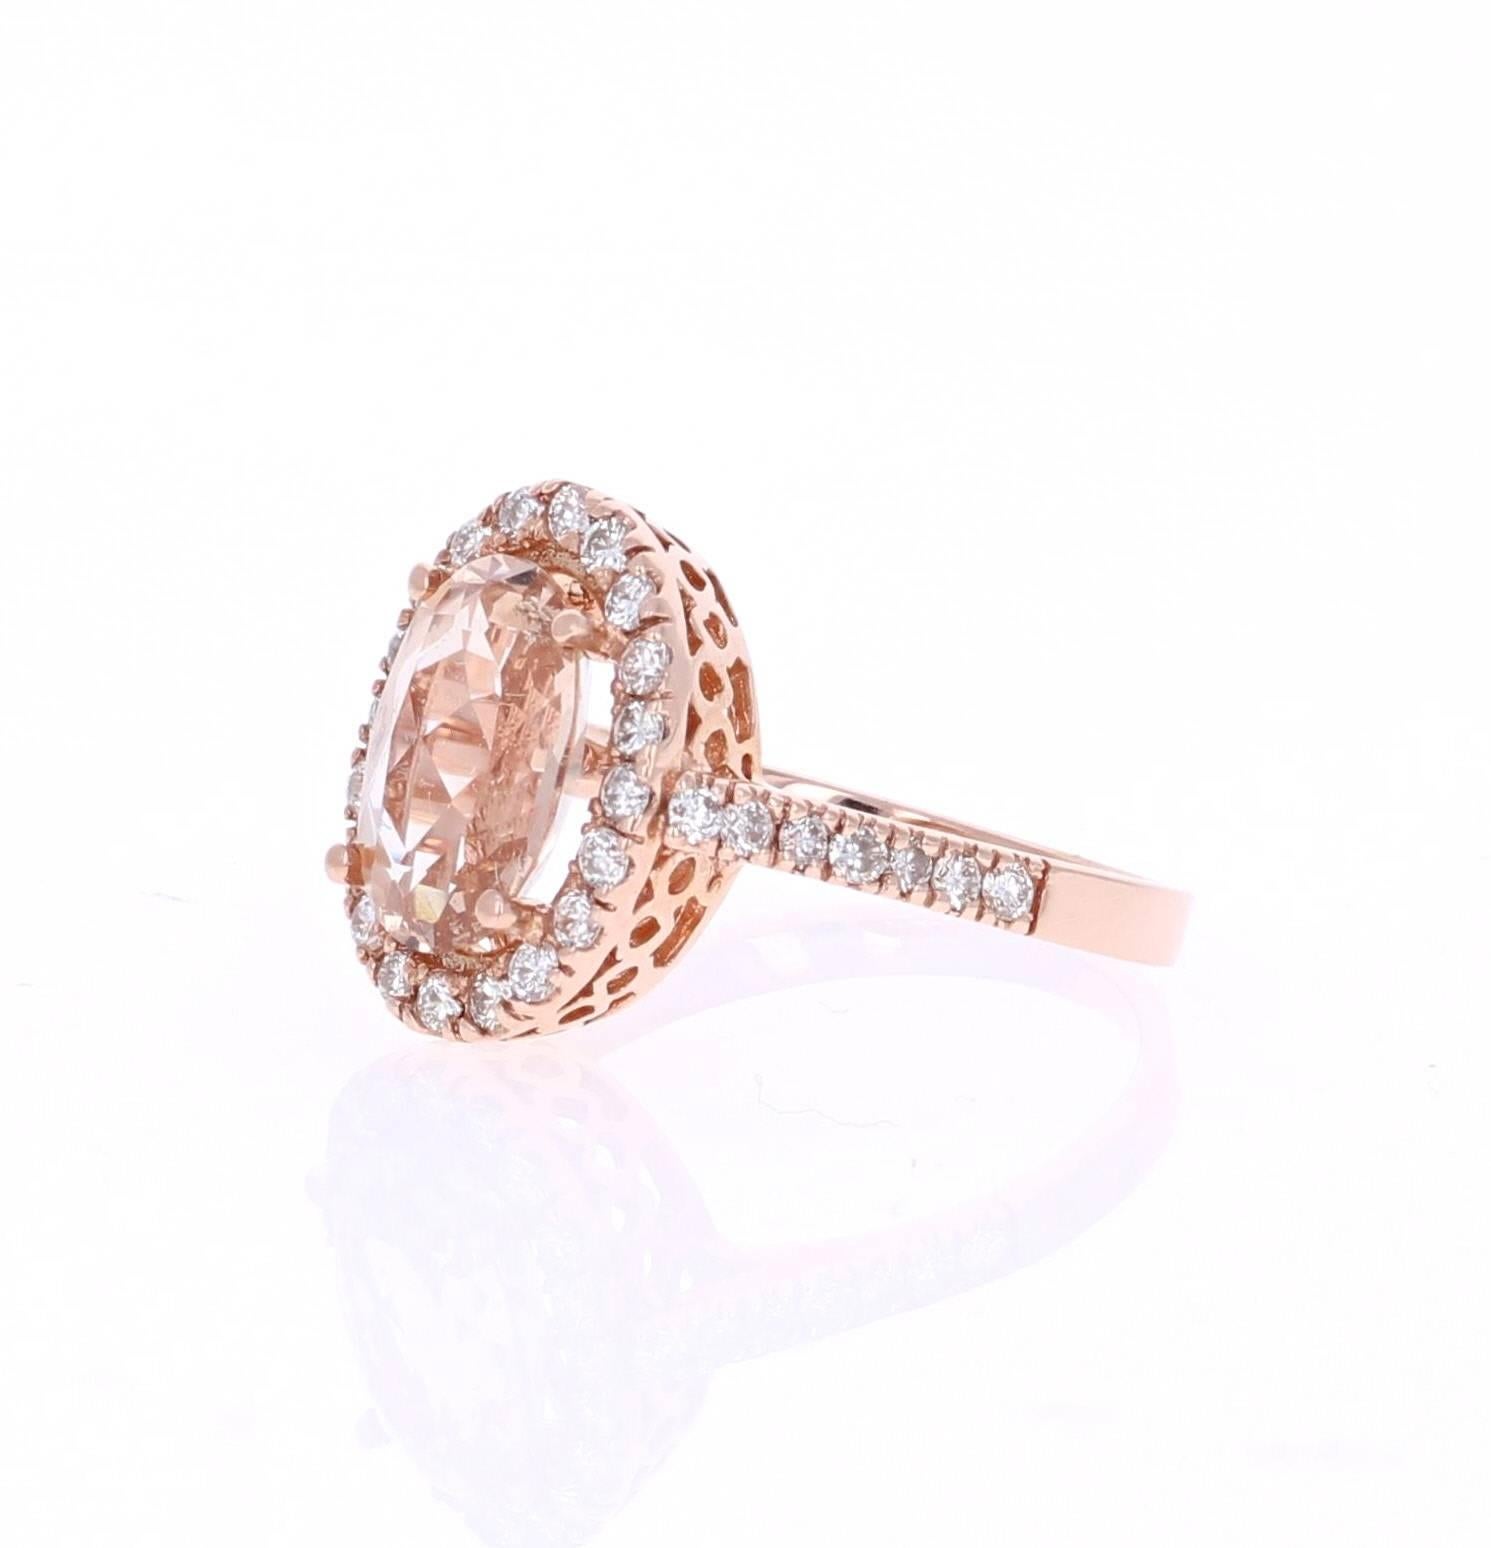 This classic Morganite Ring has a 2.45 Carat Oval Cut Morganite as its center and is surrounded by a halo of 34 Round Cut Diamonds that weigh 0.65 Carats. The clarity and color of the diamonds are VS-H.   The total carat weight of the ring is 3.10